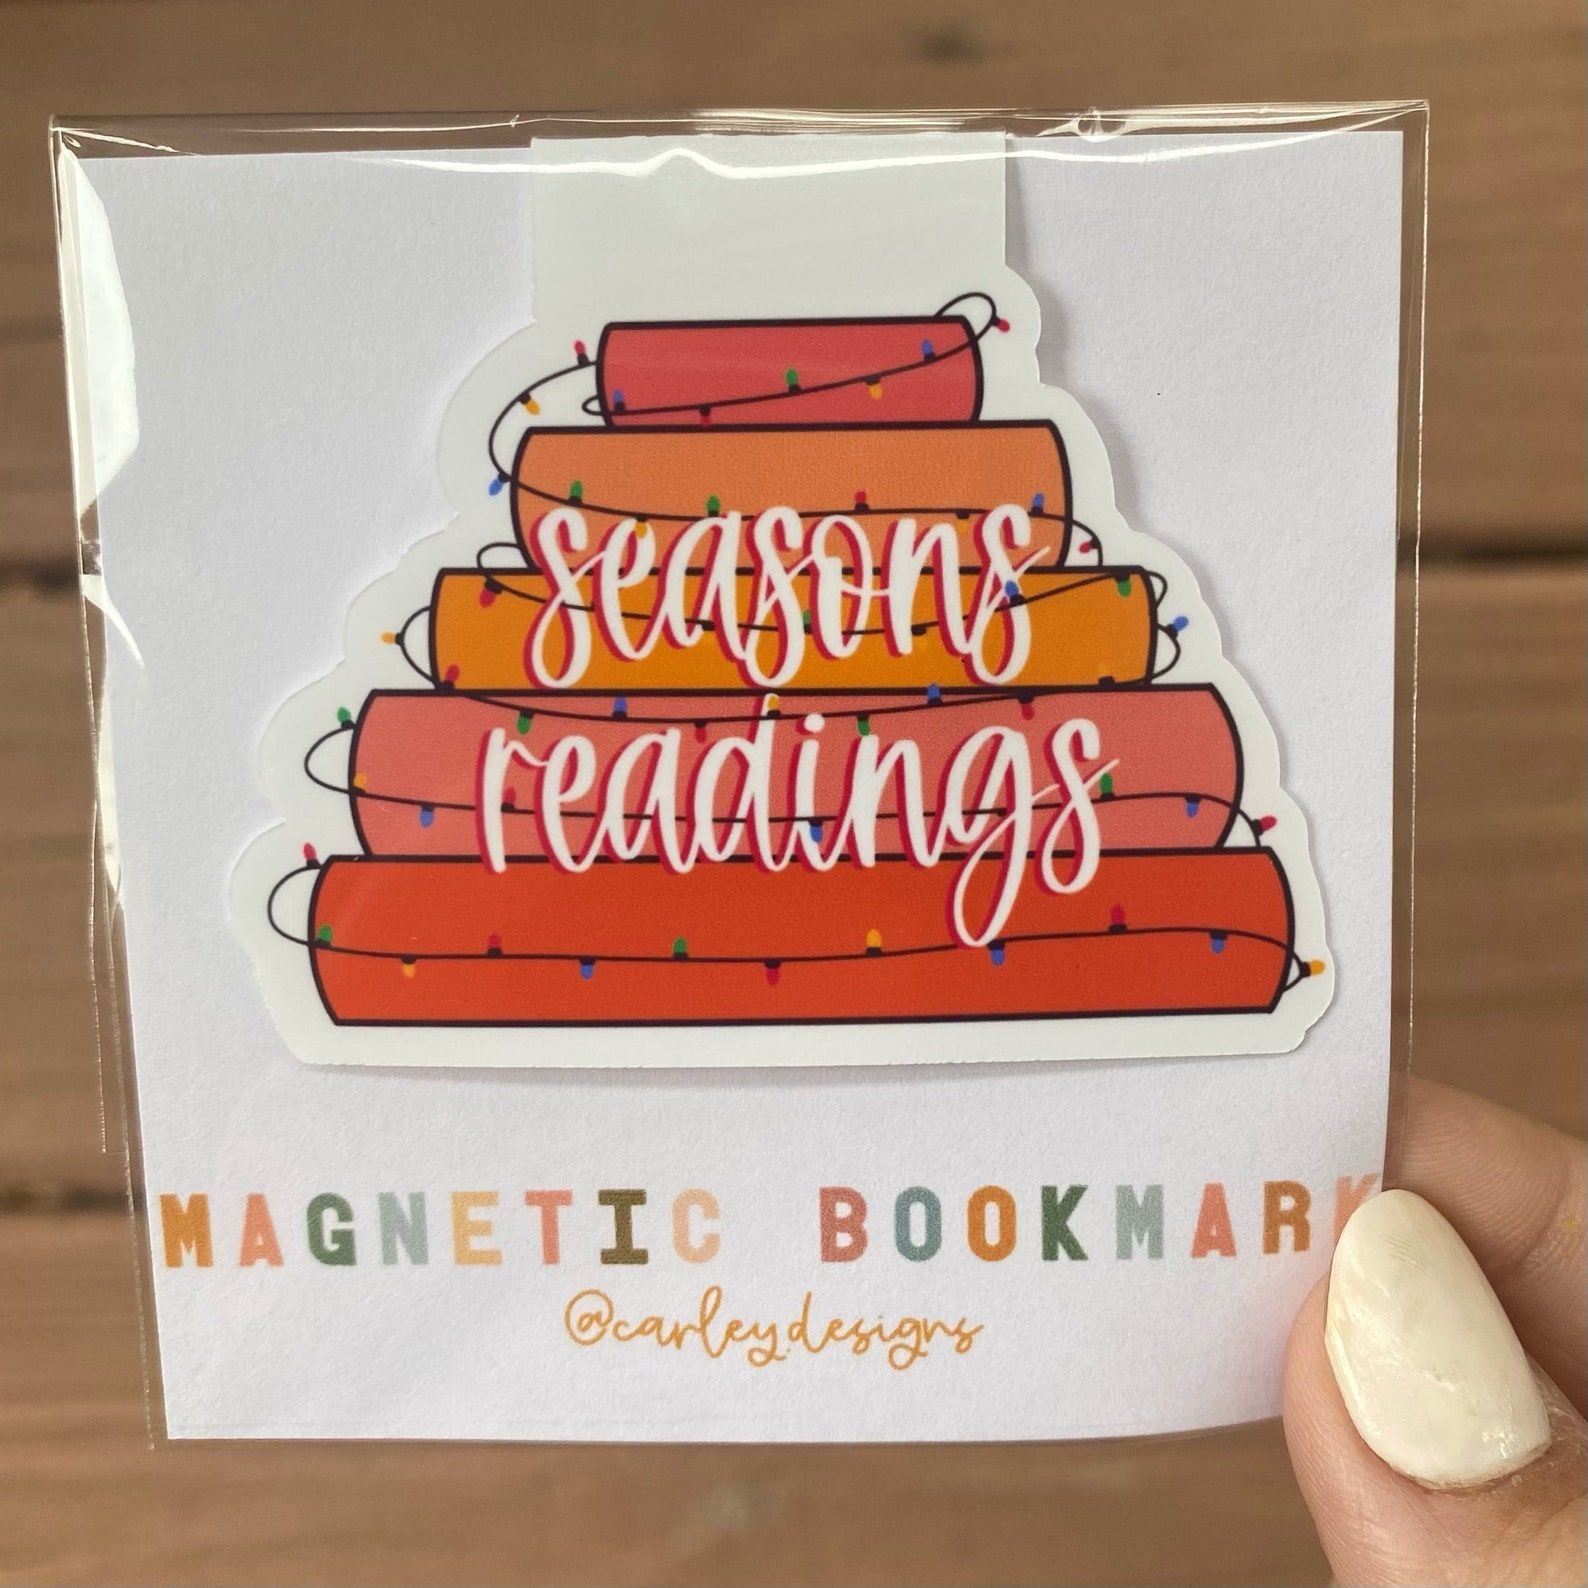 Image of a hand holding the package for a magnetic bookmark. The bookmark inside the package is a stack of books wrapped in lights and reads "Seasons readings" in a script font. 